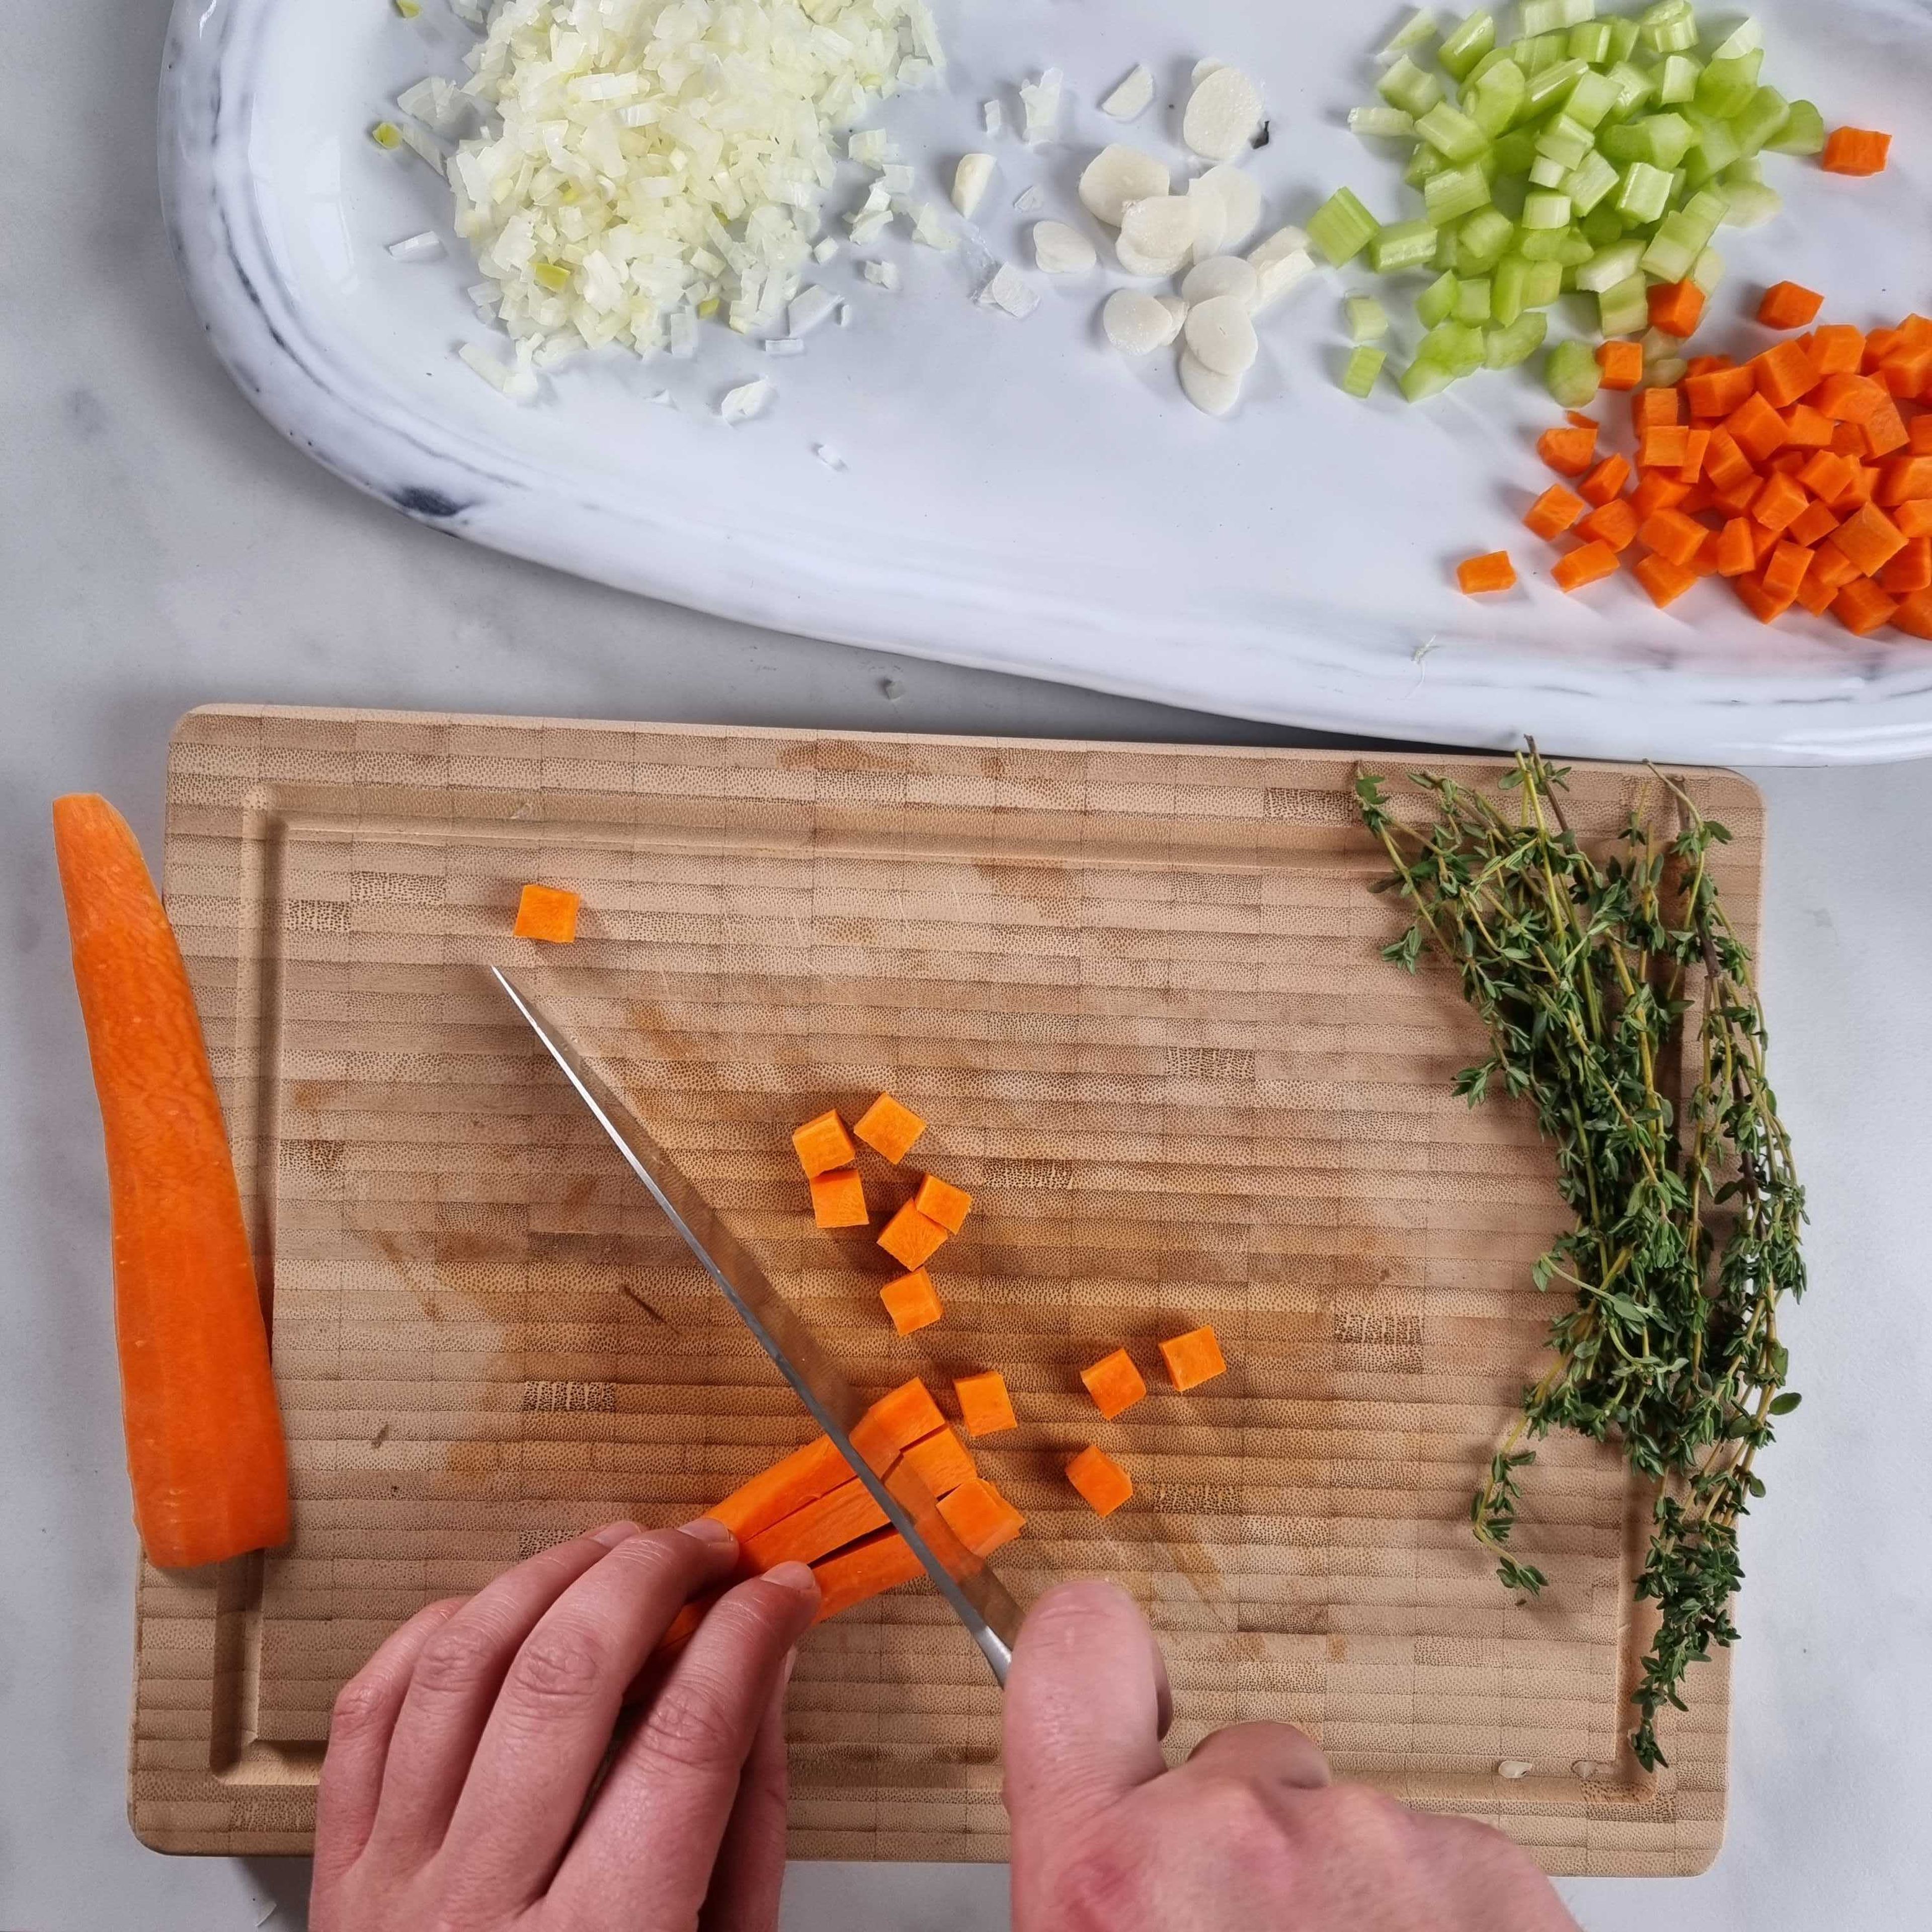 Finely chop the garlic and onions. Cut the celery and carrots into cubes. Finely chop the rosemary and thyme. Drain the canned tomatoes in a sieve, reserving the liquid. Then crush the tomatoes with your fingers.